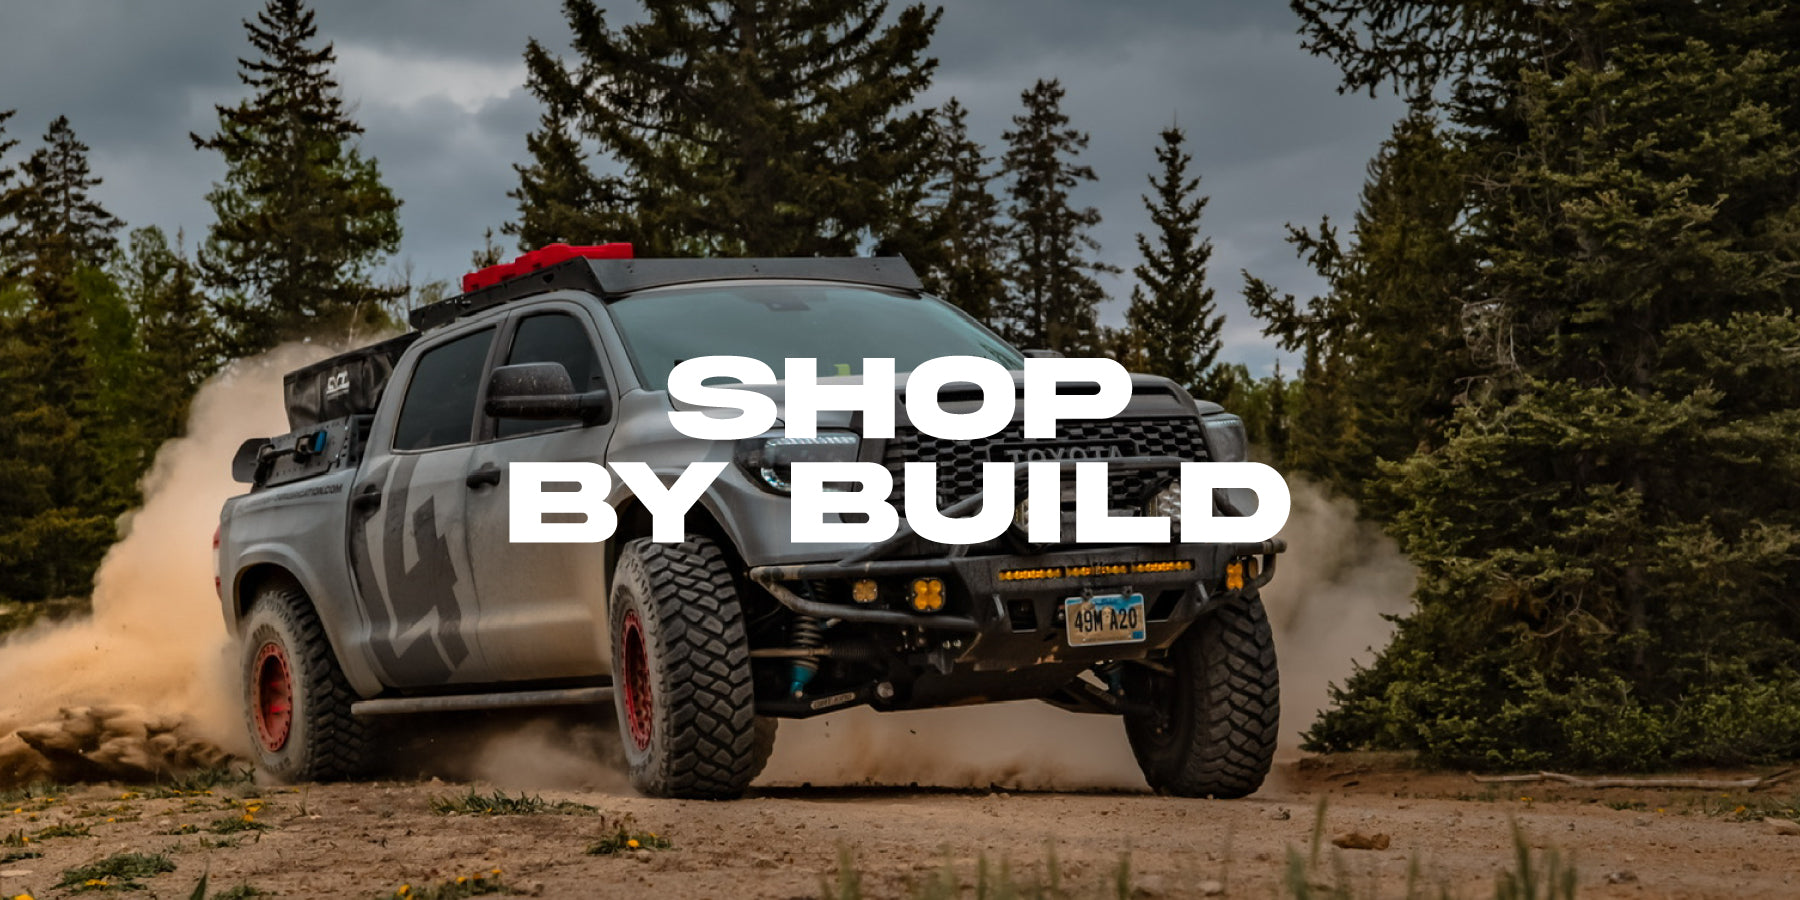 Offroad ready tundra built on 37 inch tires with 17inch wheels baja design lights ce4 fabrication ovrland bumper sherpa roofrack cvt tent rock sliders and skid plates delta shovel waterport